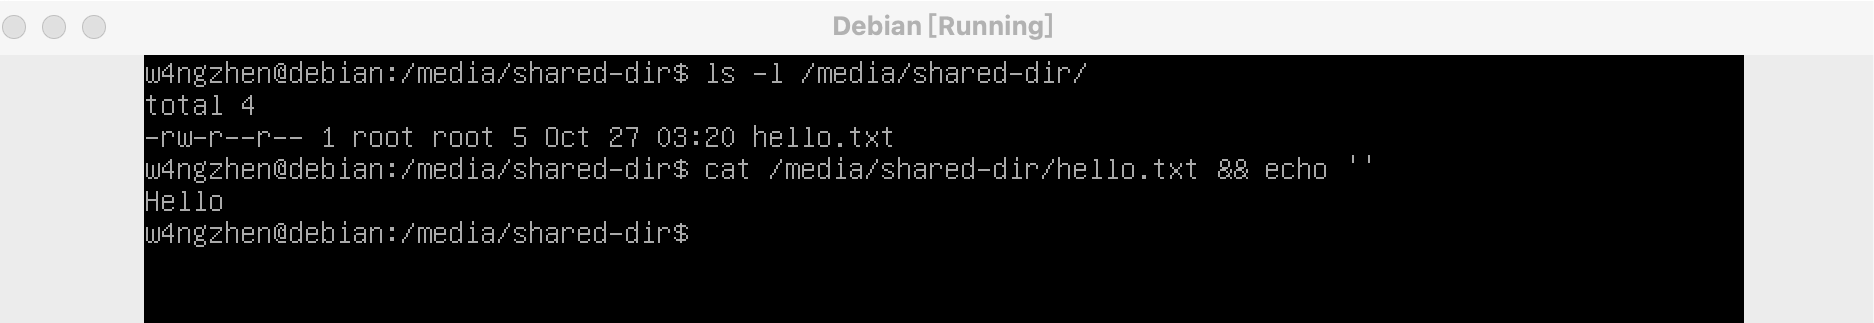 070-shared-file-in-linux